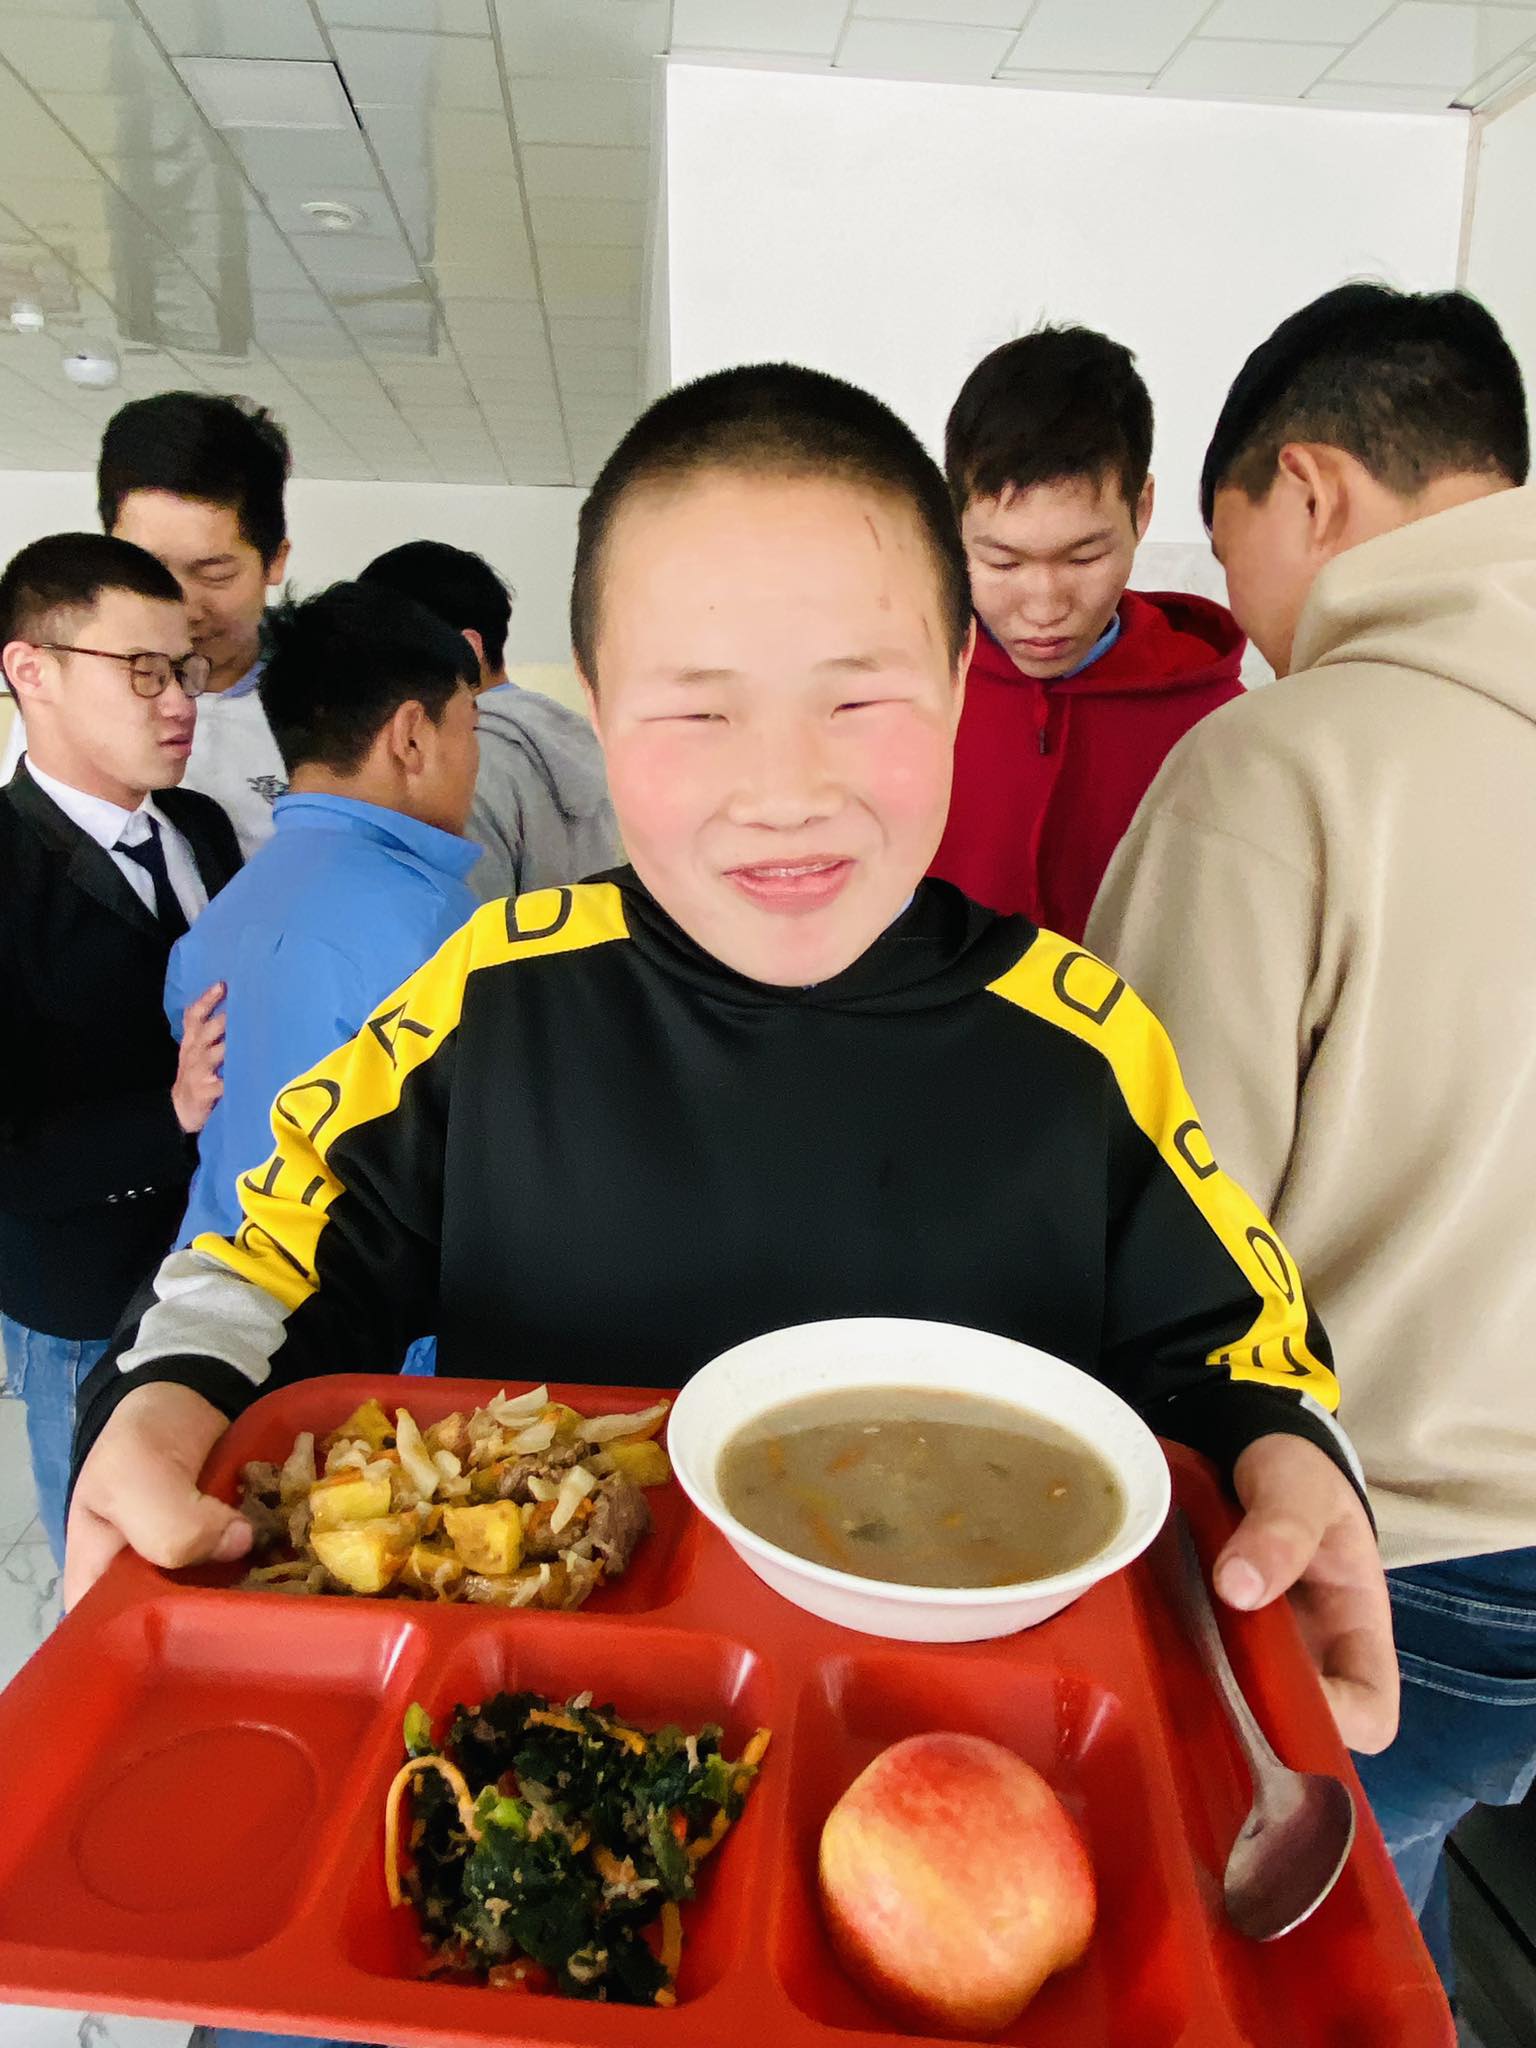 Boy smiles big holding school lunch tray in Mongolia